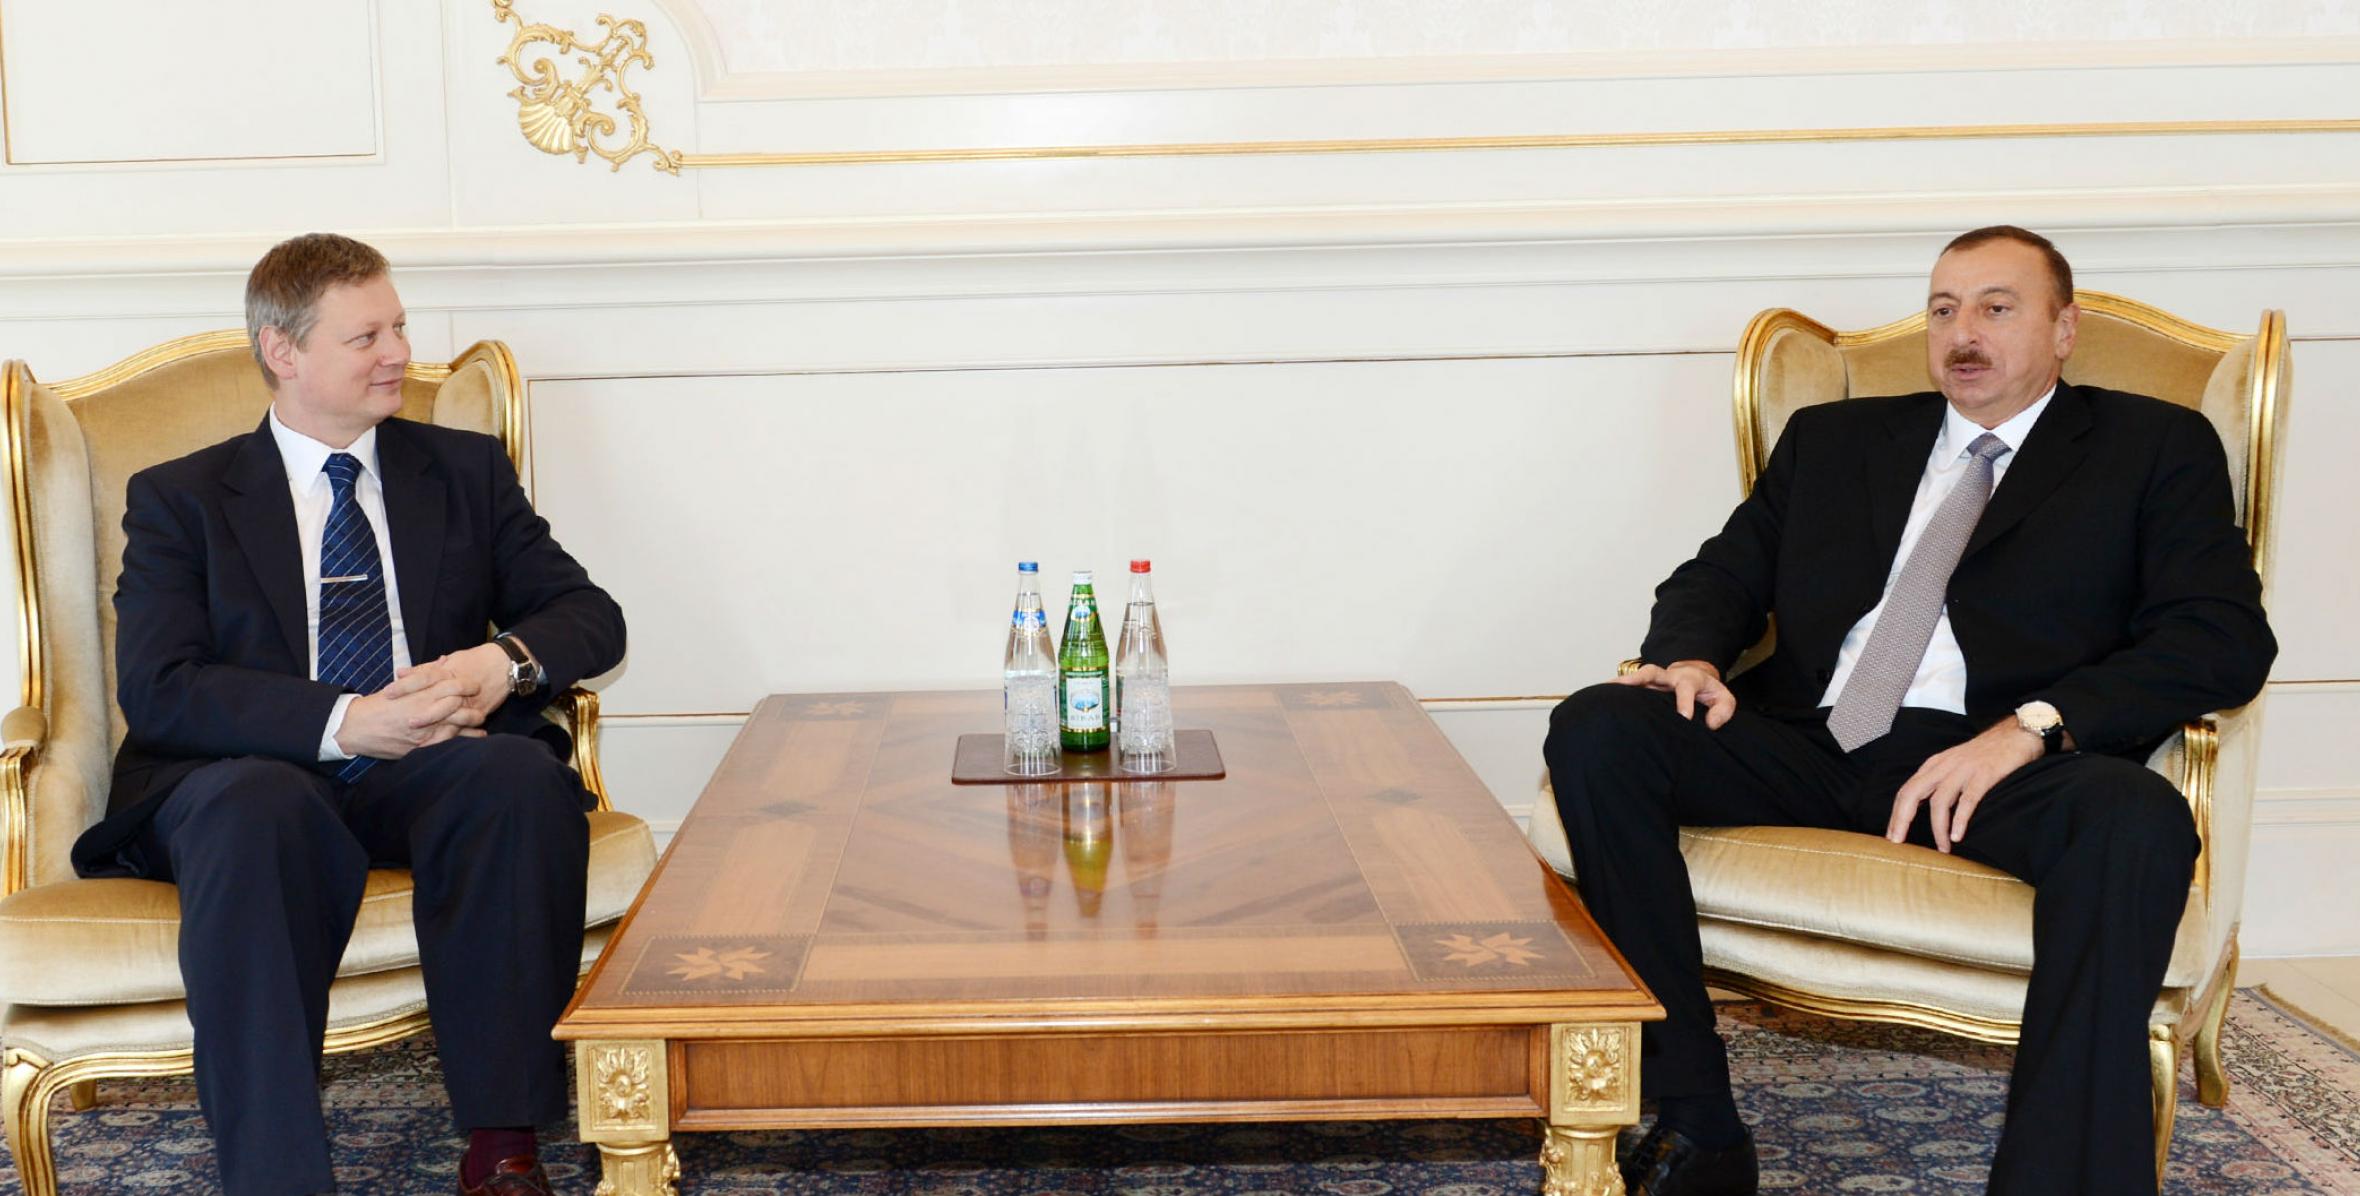 Ilham Aliyev accepted the credentials from the newly-appointed Ambassador of Estonia to Azerbaijan